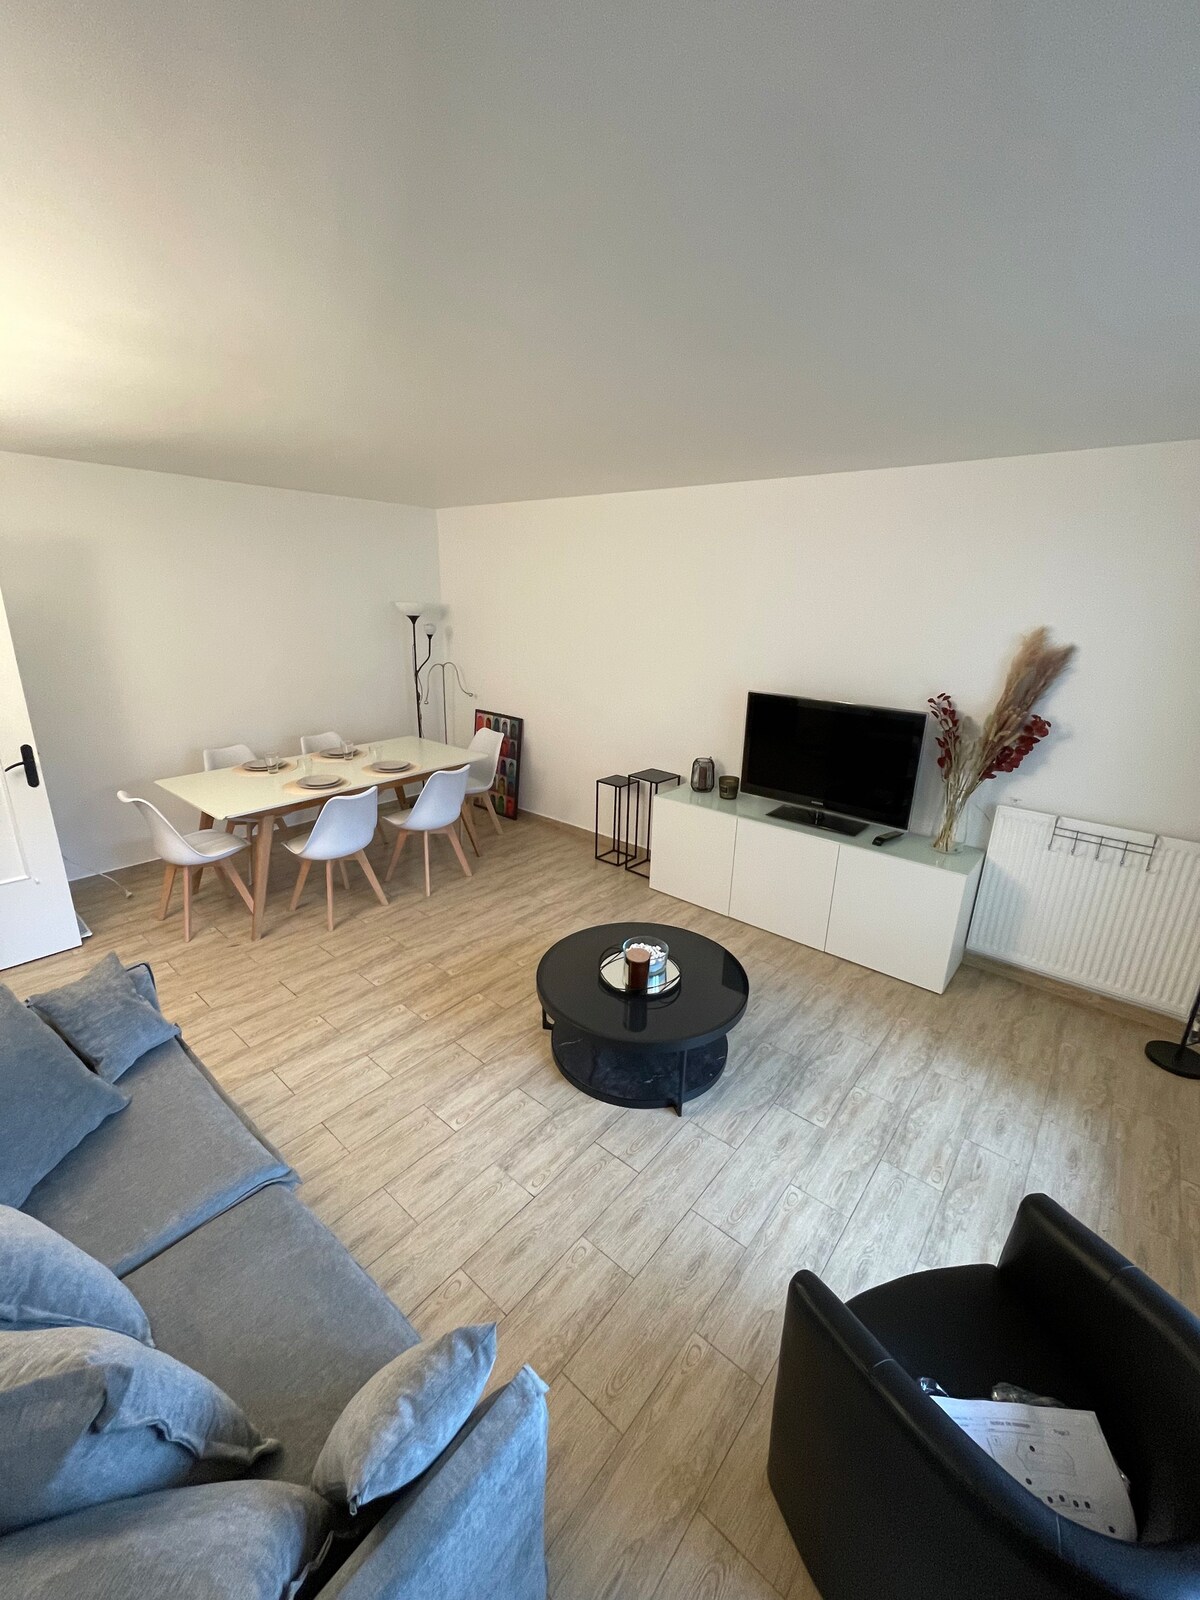 3 bedroom renovated in cergy (25min from Paris)